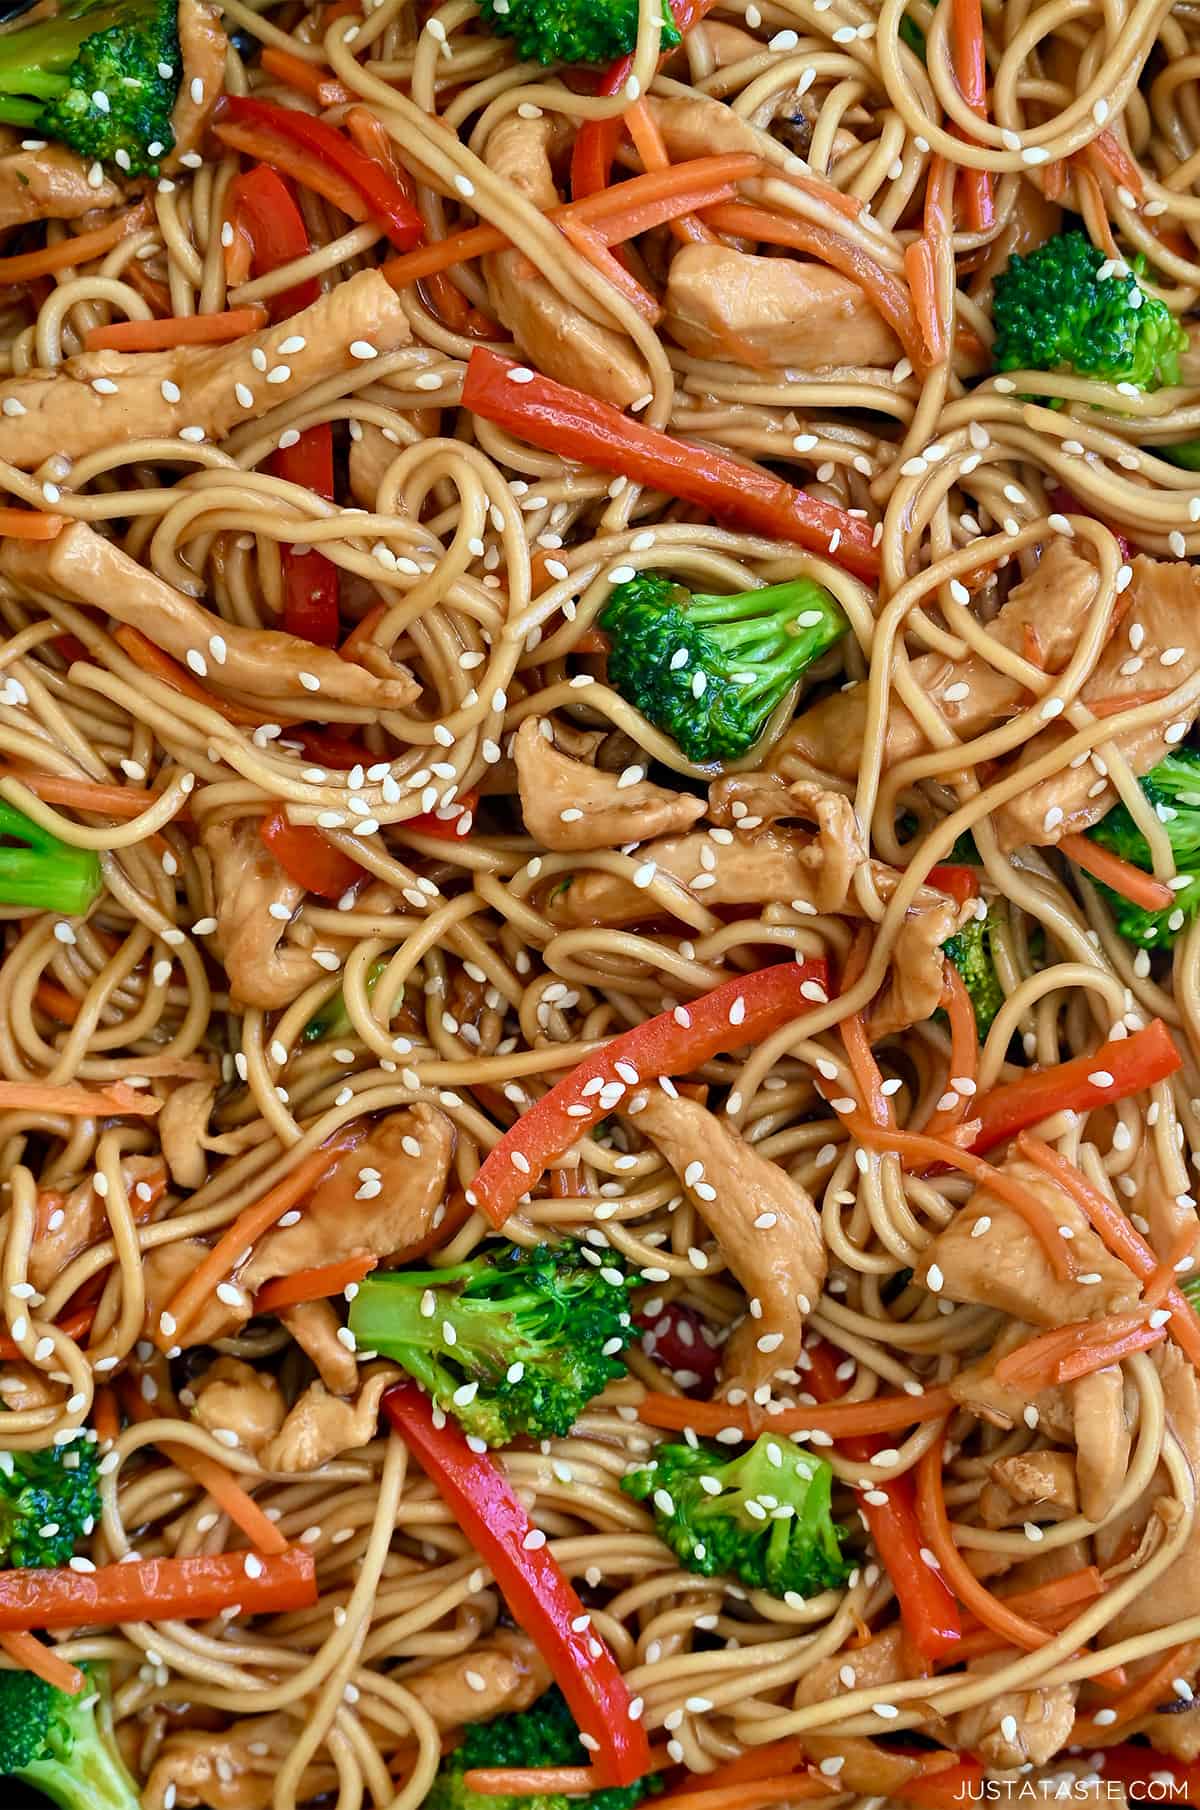 Noodles, chicken strips, broccoli florets, shredded carrots and sliced red bell pepper coated in teriyaki sauce and garnished with sesame seeds.